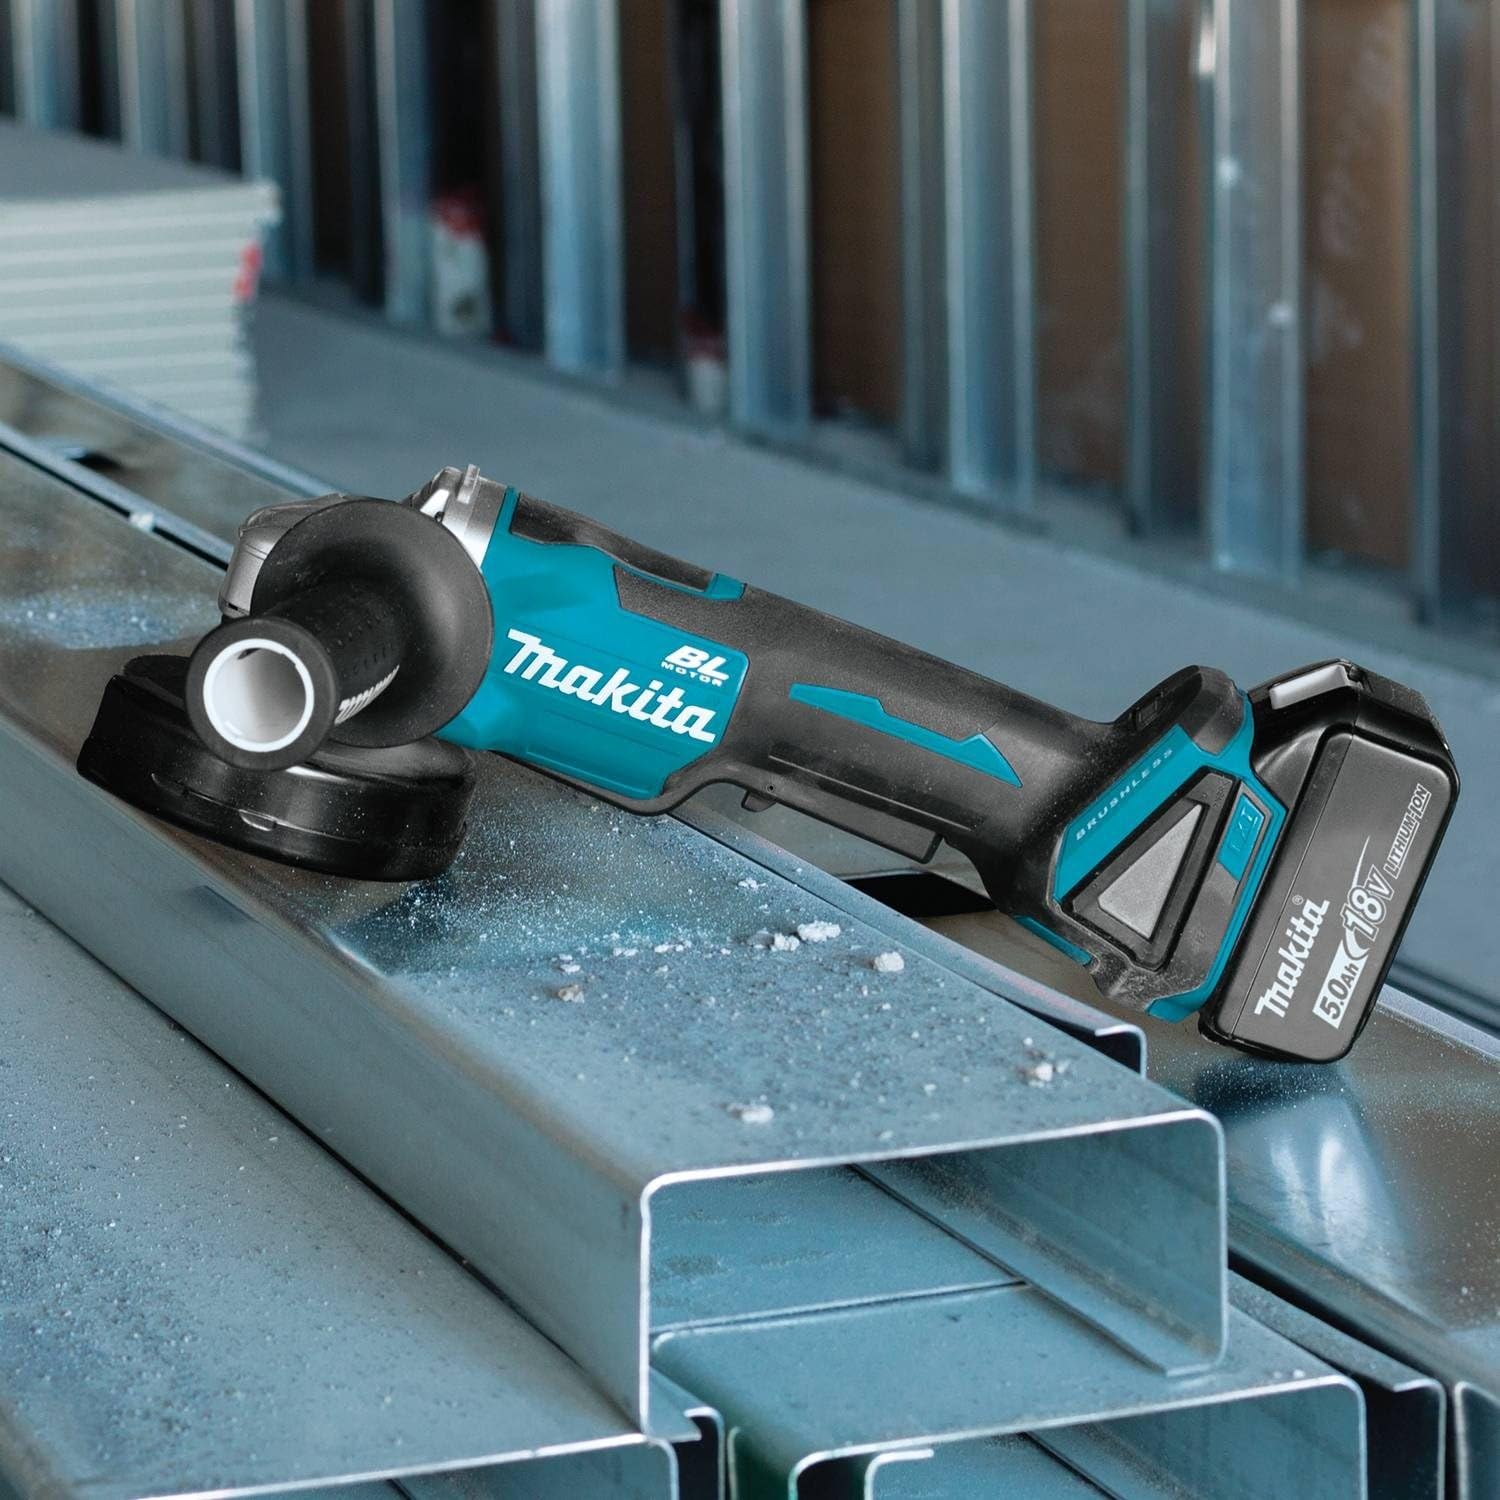 Makita XAG11Z 18V LXT® Lithium-Ion Brushless Cordless 4-1/2” / 5 Paddle Switch Cut-Off/Angle Grinder, with Electric Brake, Tool Only